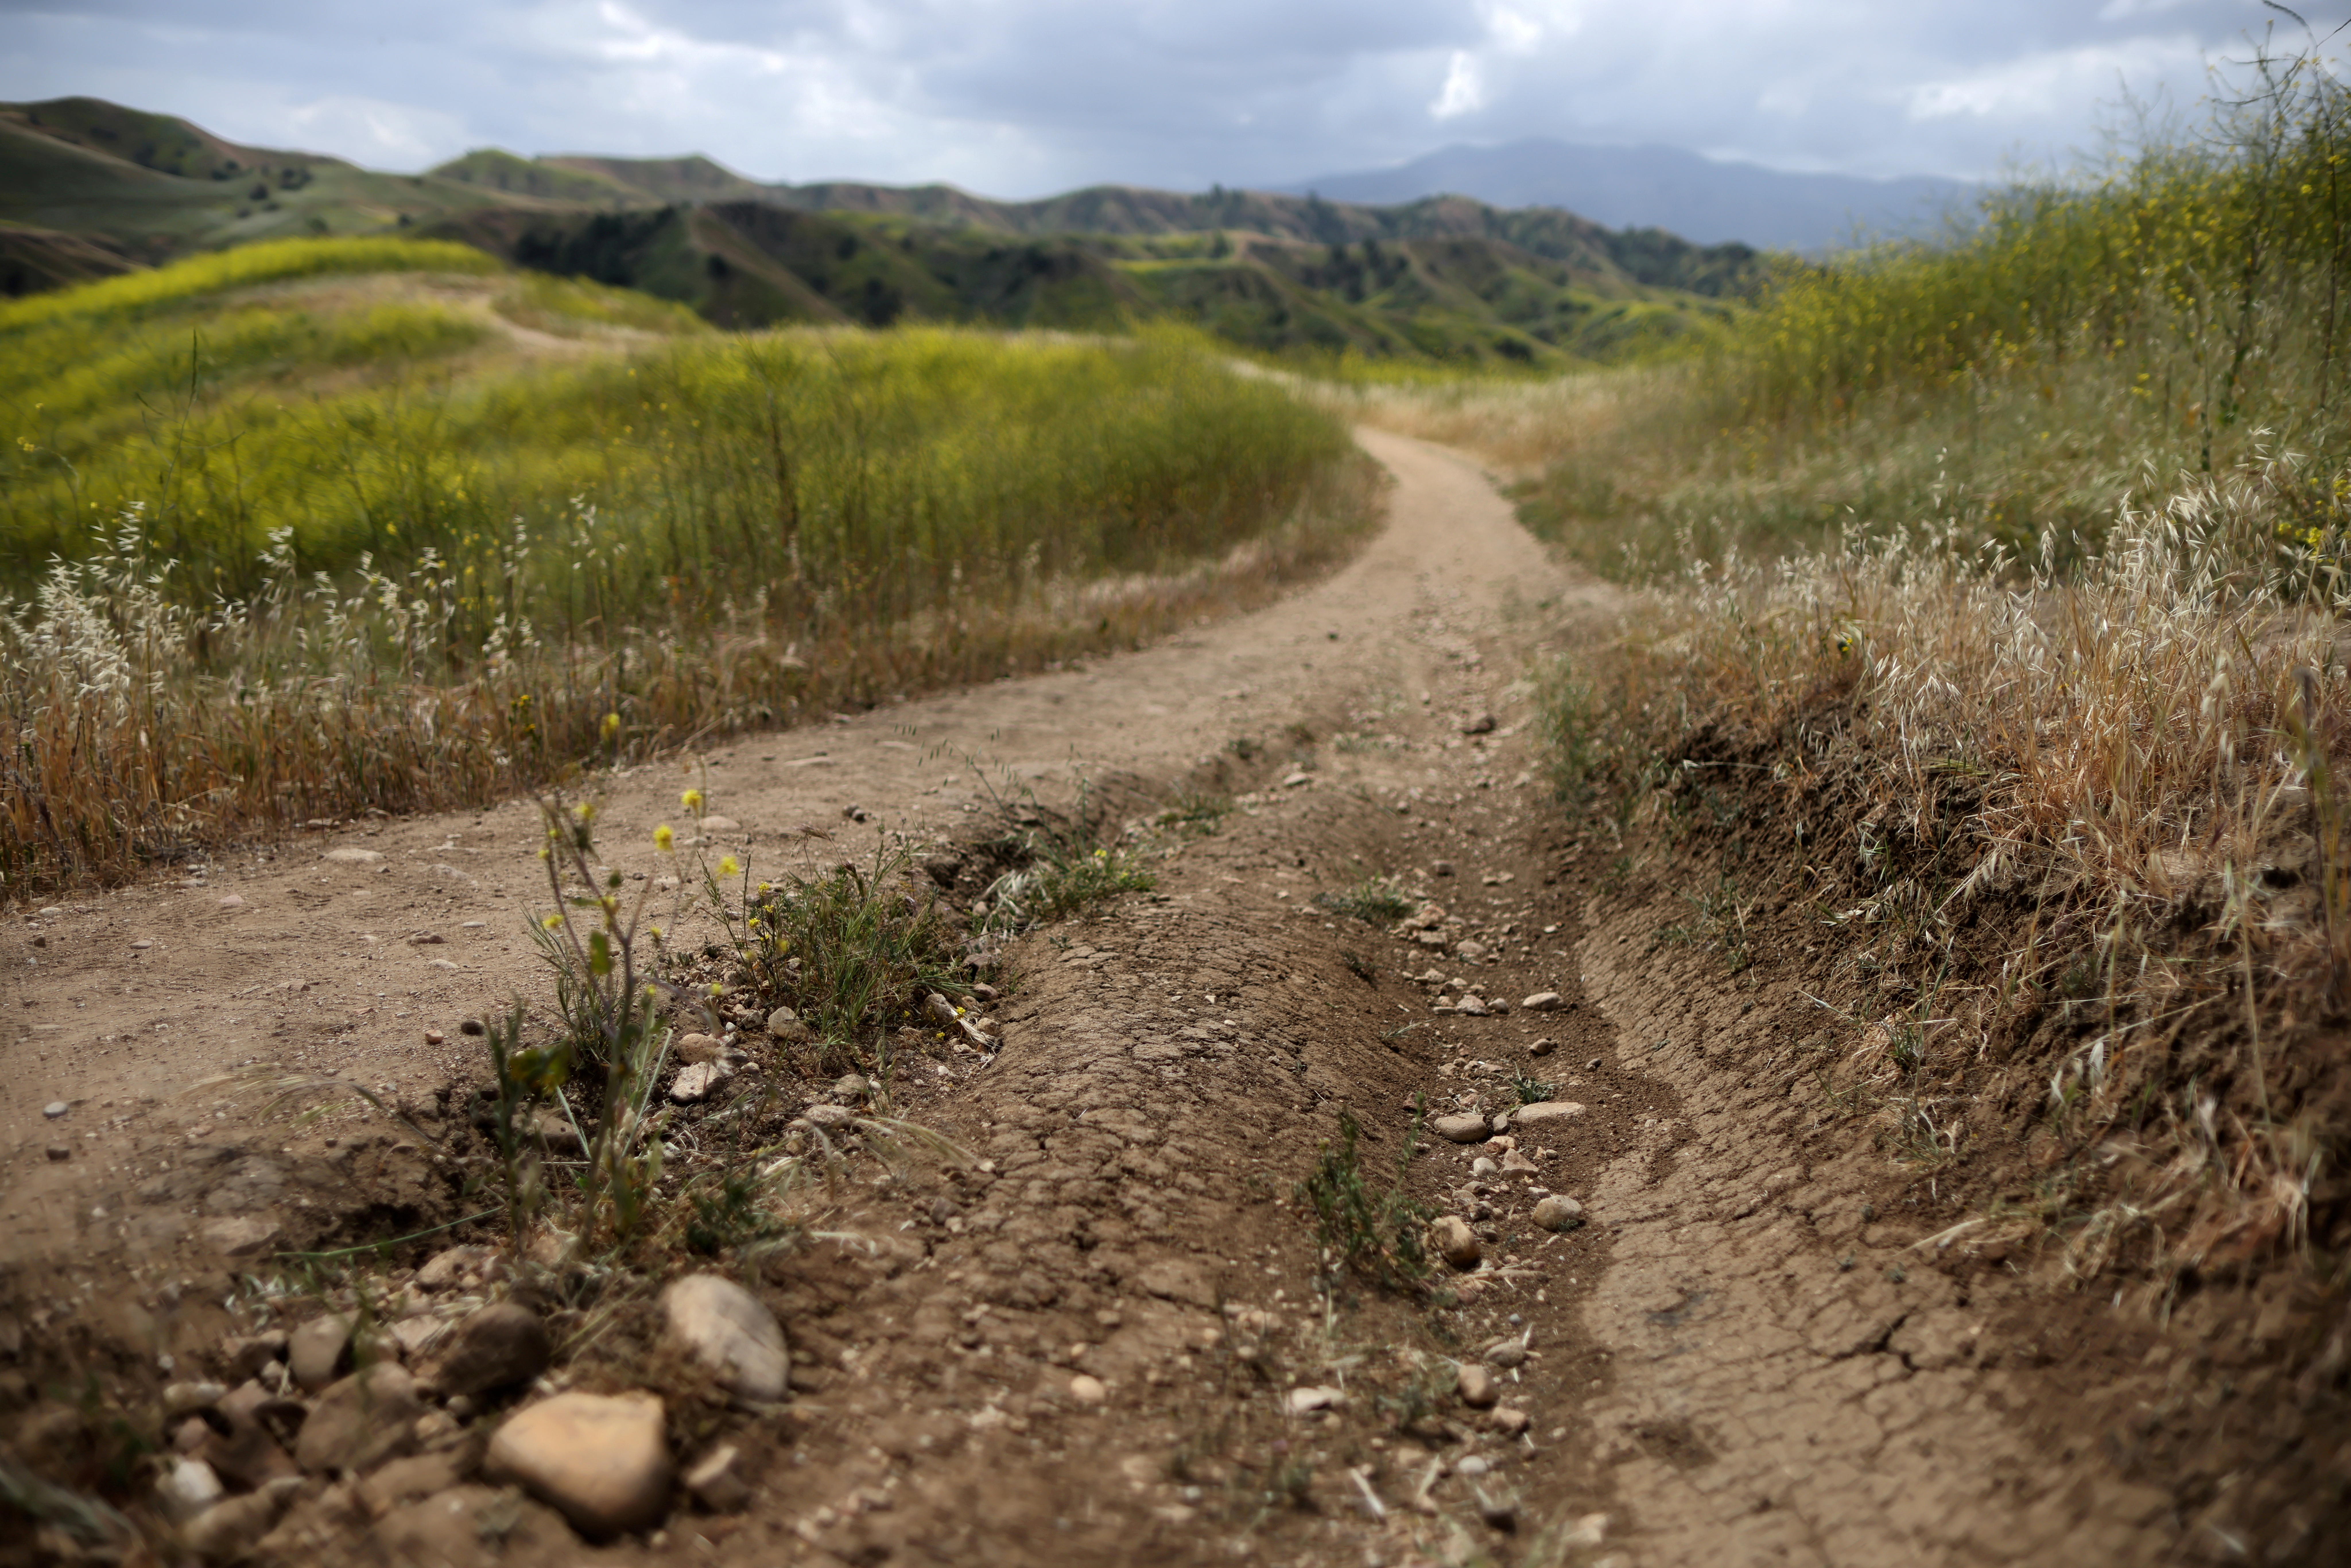 FILE PHOTO: Dried mud is seen on the path in the burn zone of Chino Hills State Park, as California faces a drought, in Chino Hills